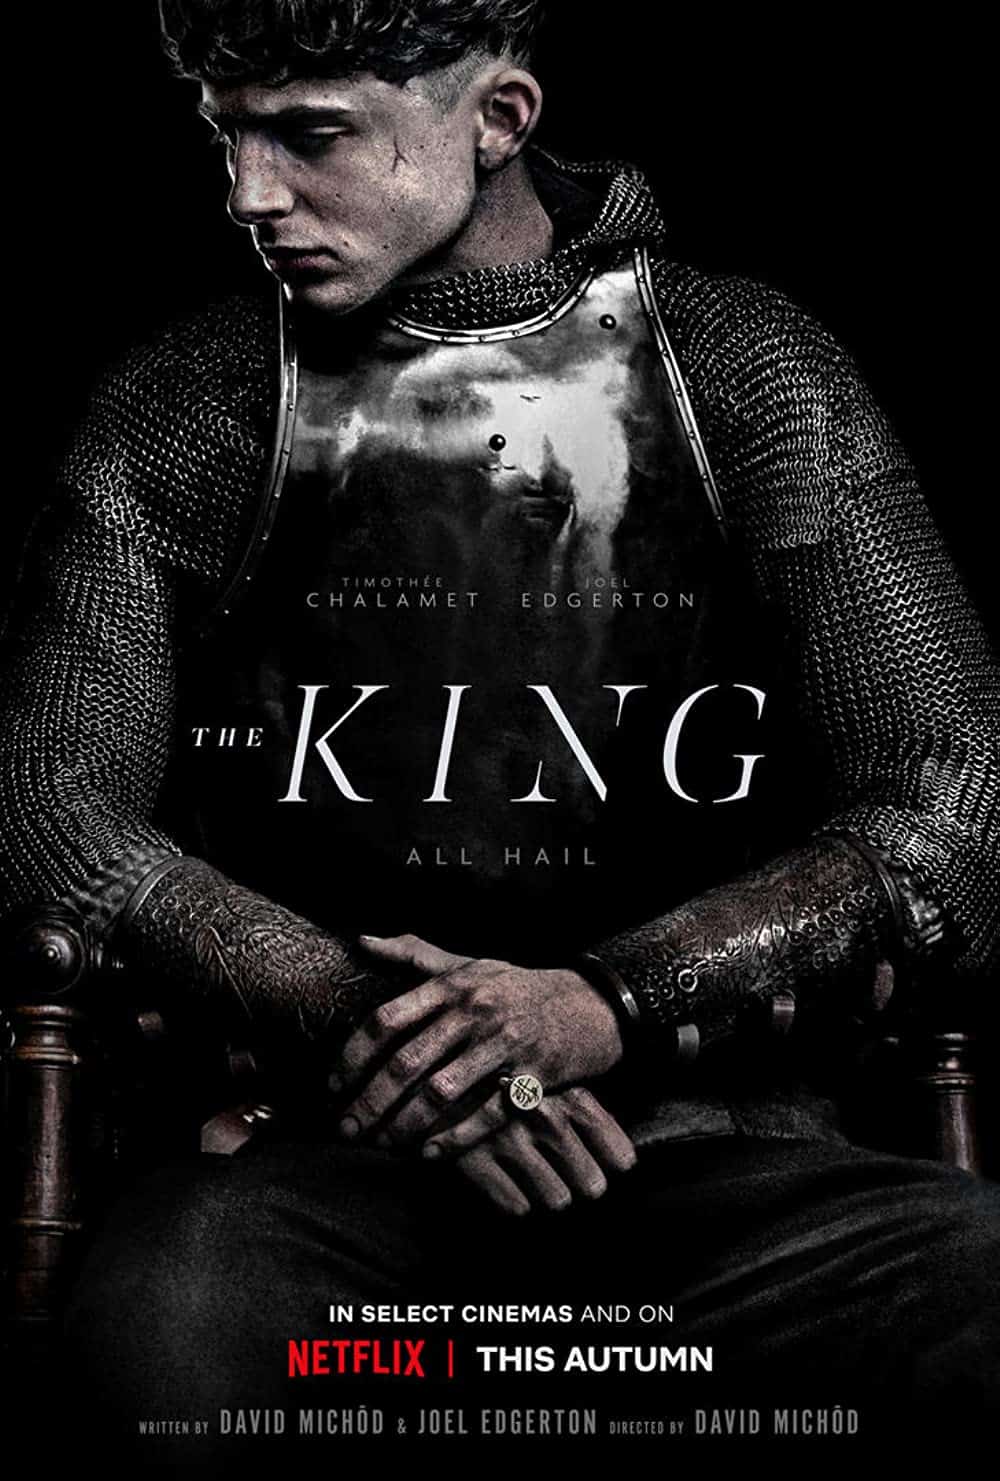 The King (2019) Best Knight Movies to Add in Your Watchlist